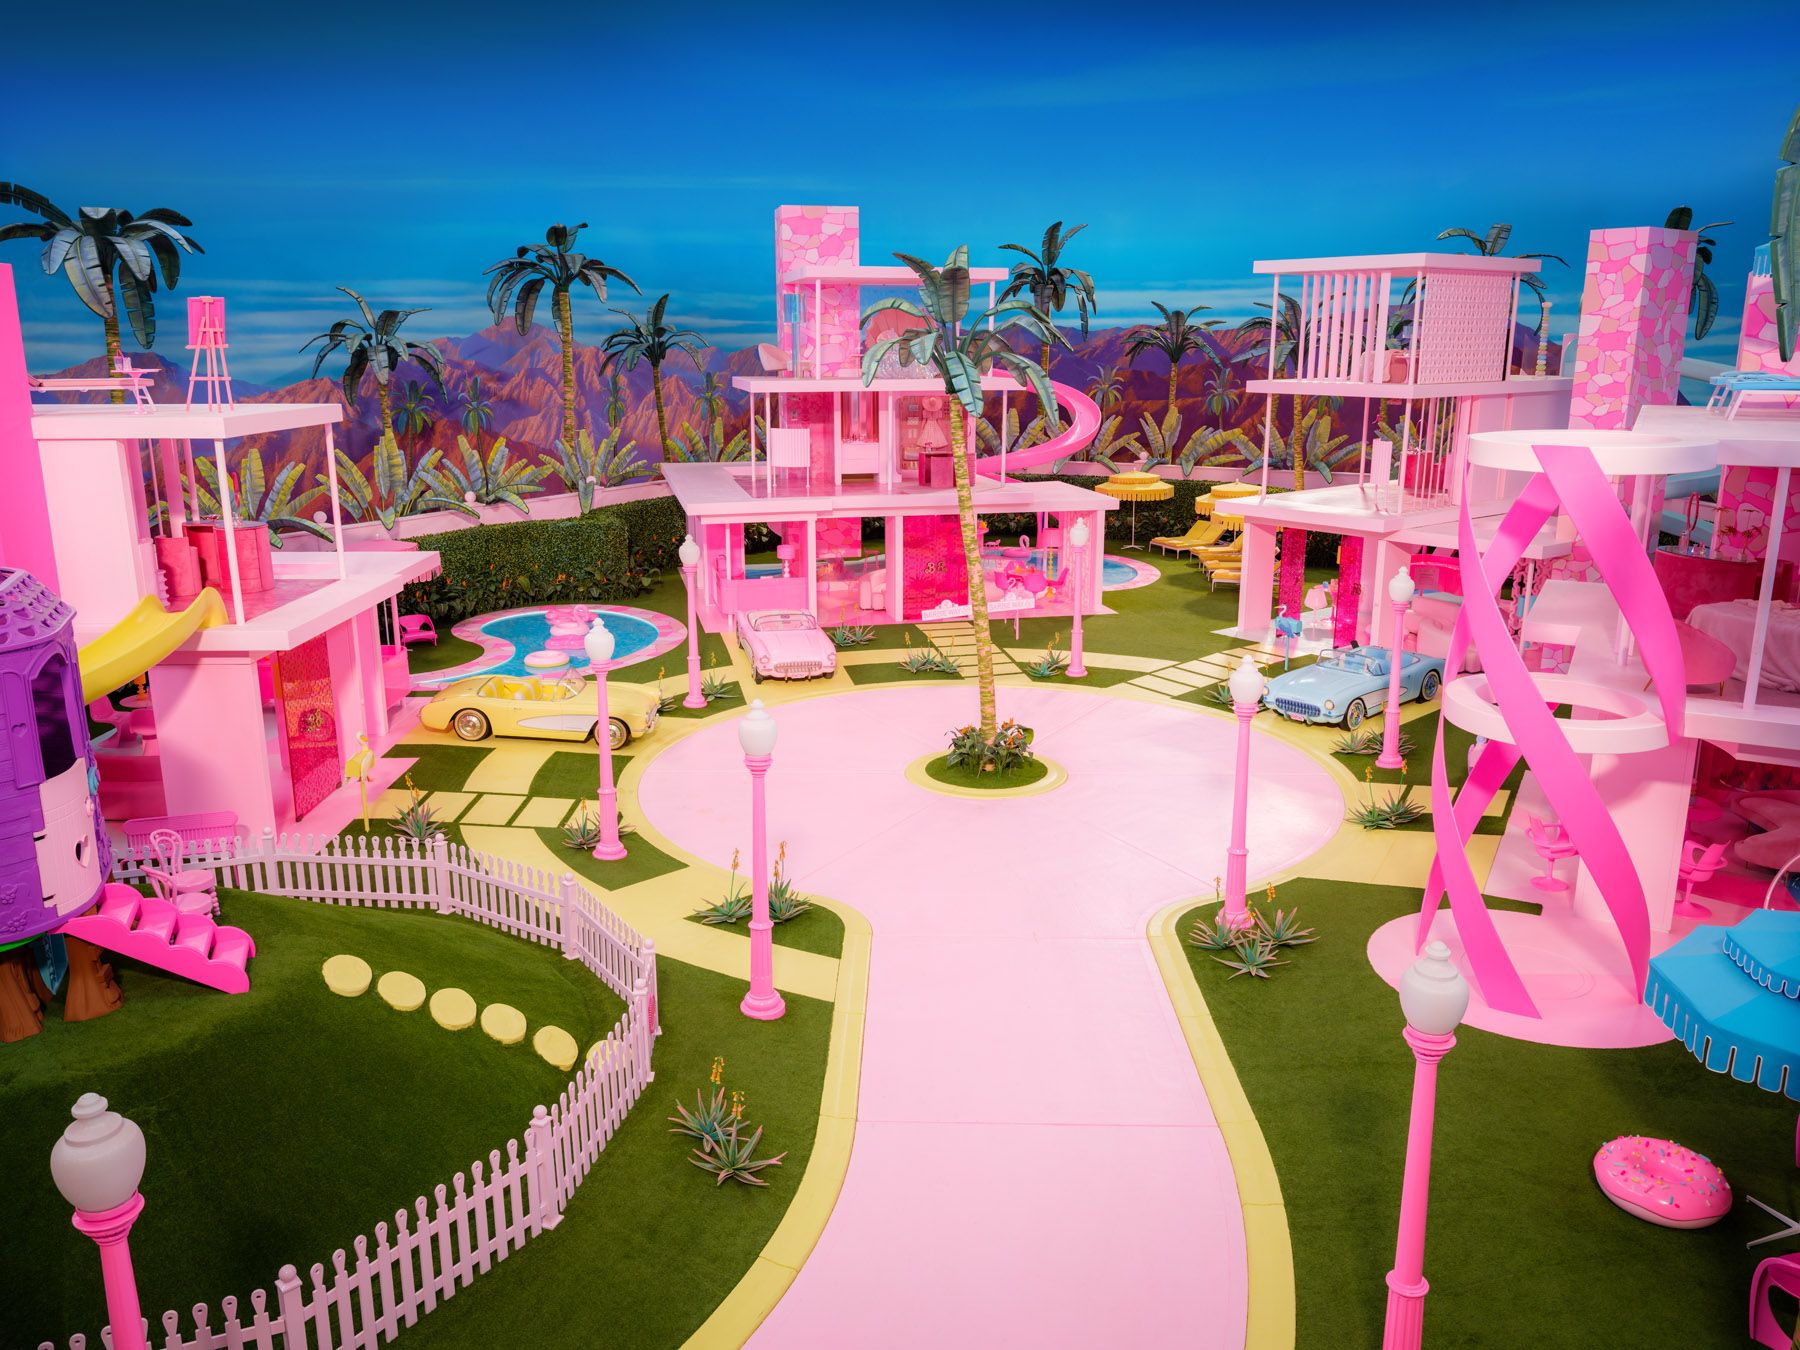 Before Barbie got meta, there was Life In The Dreamhouse